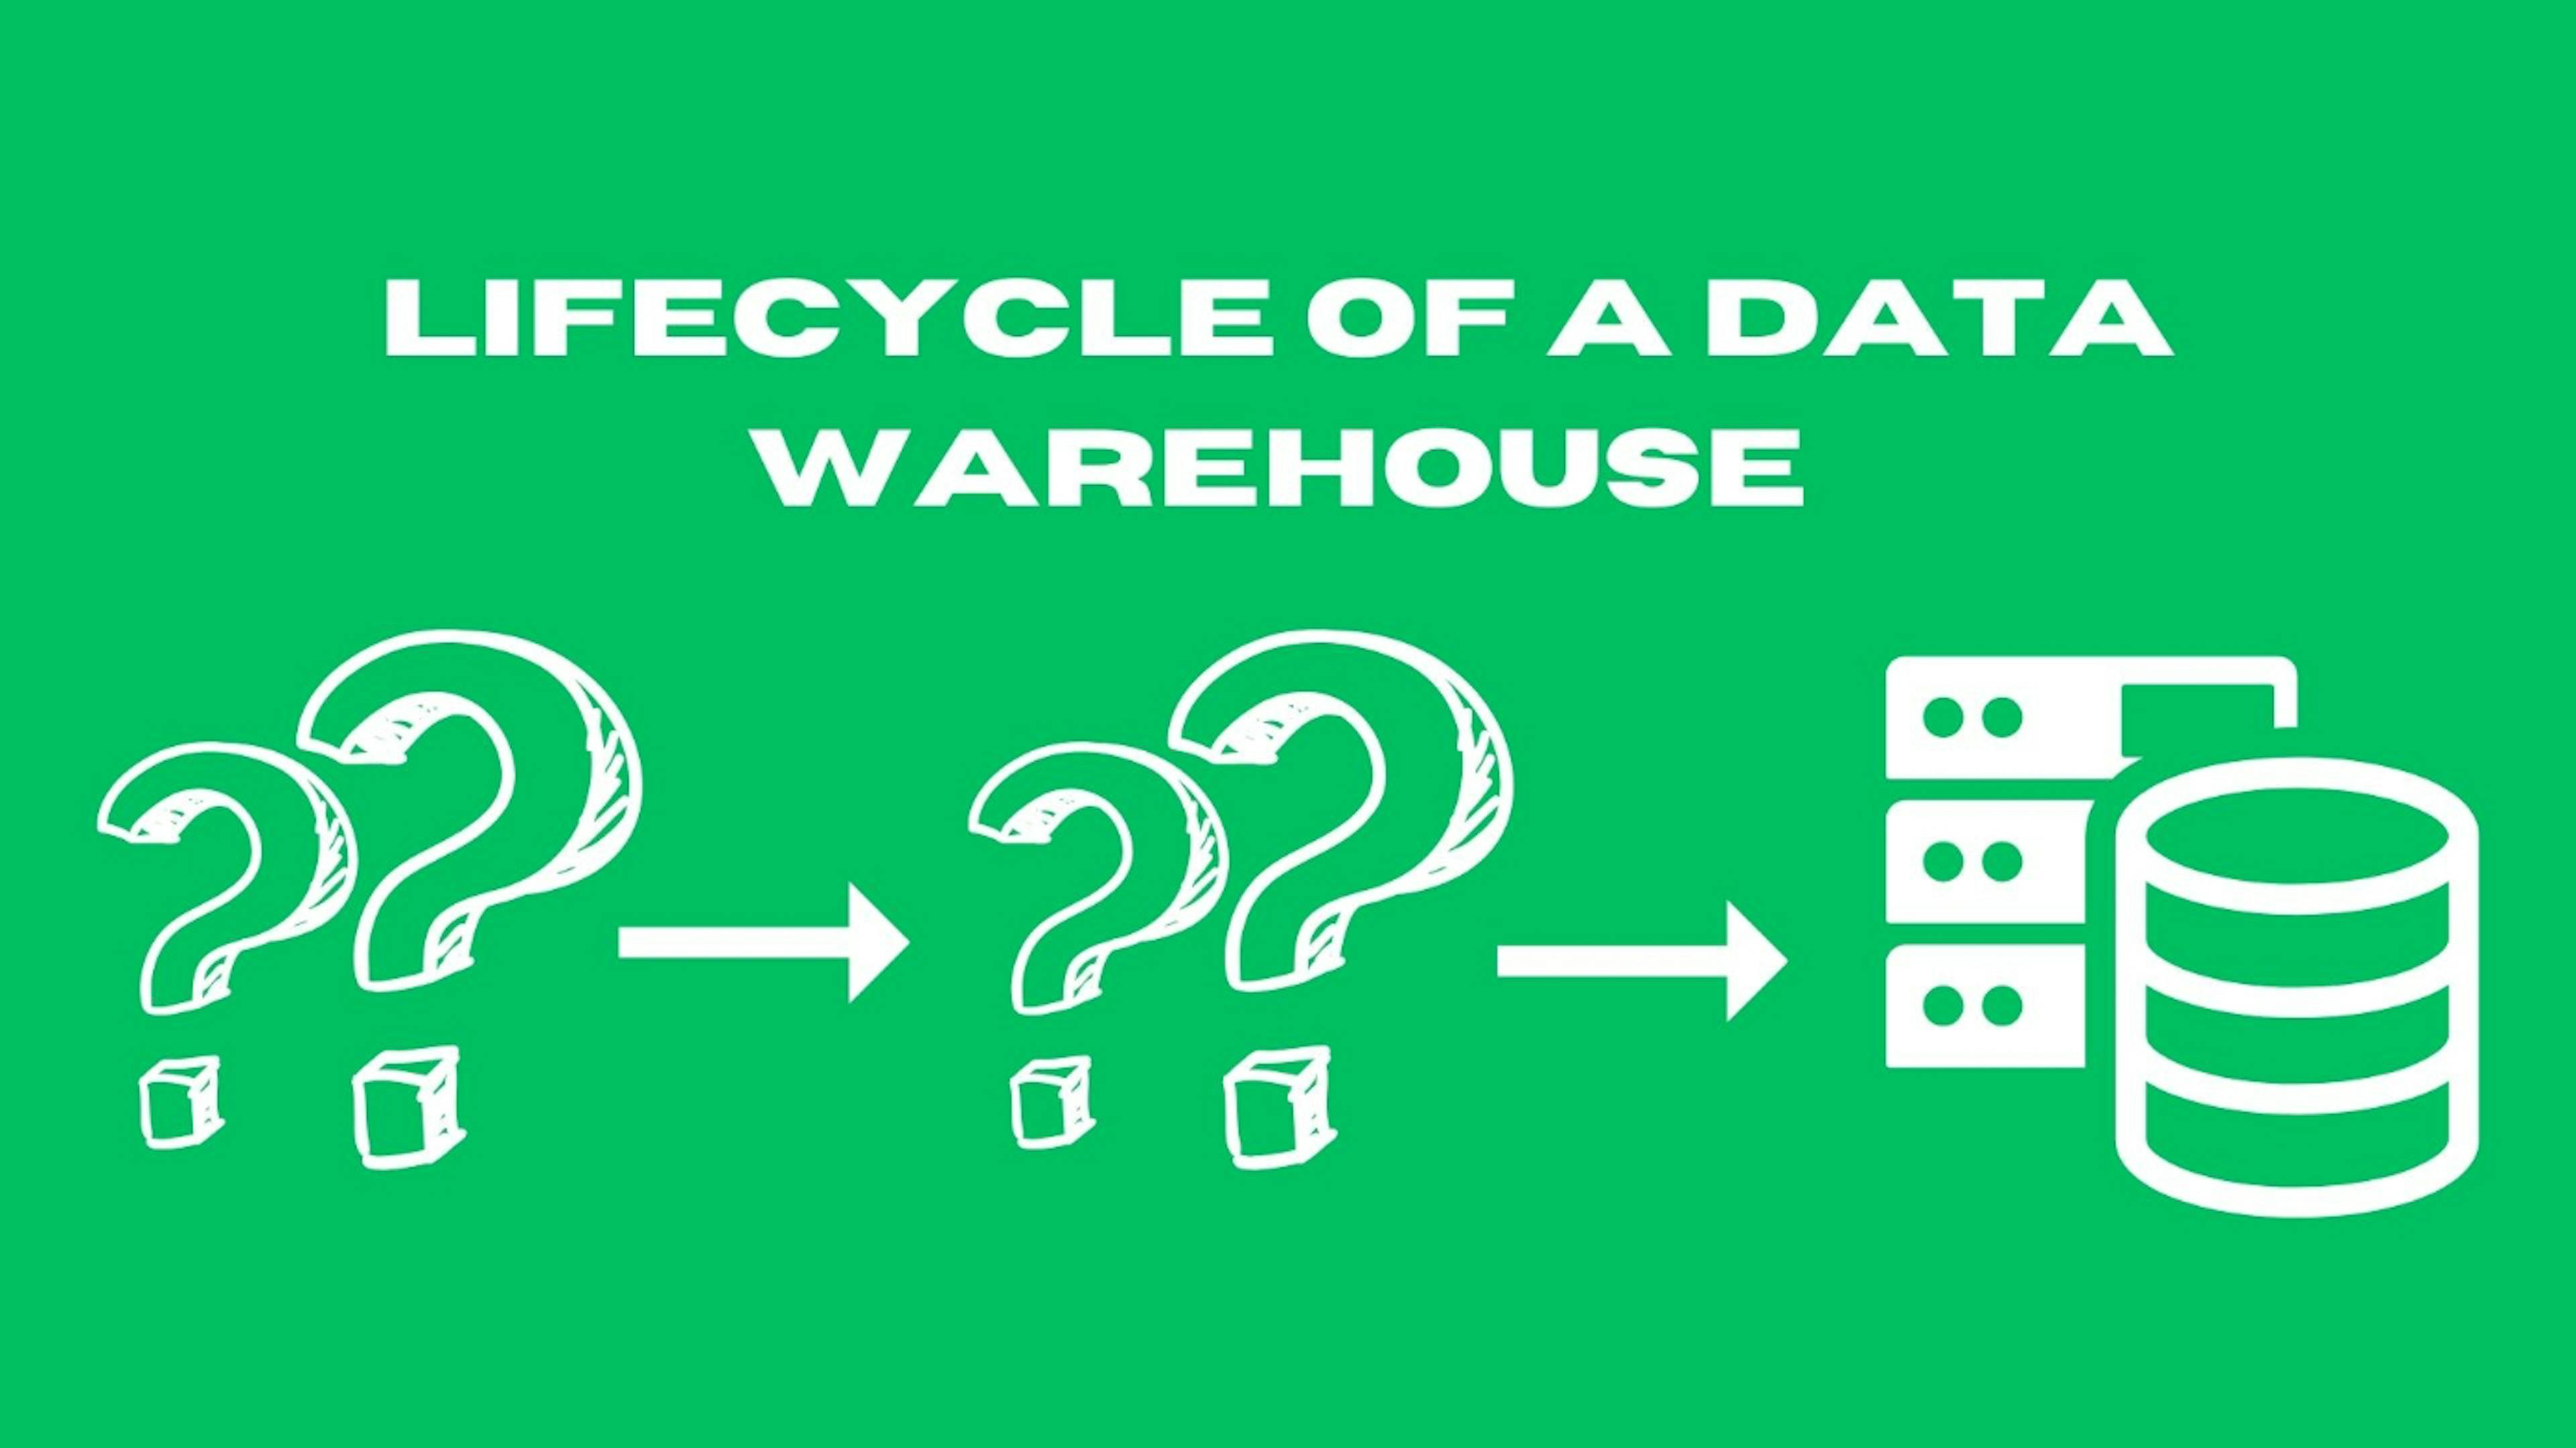 featured image - The Lifecycle of a Data Warehouse